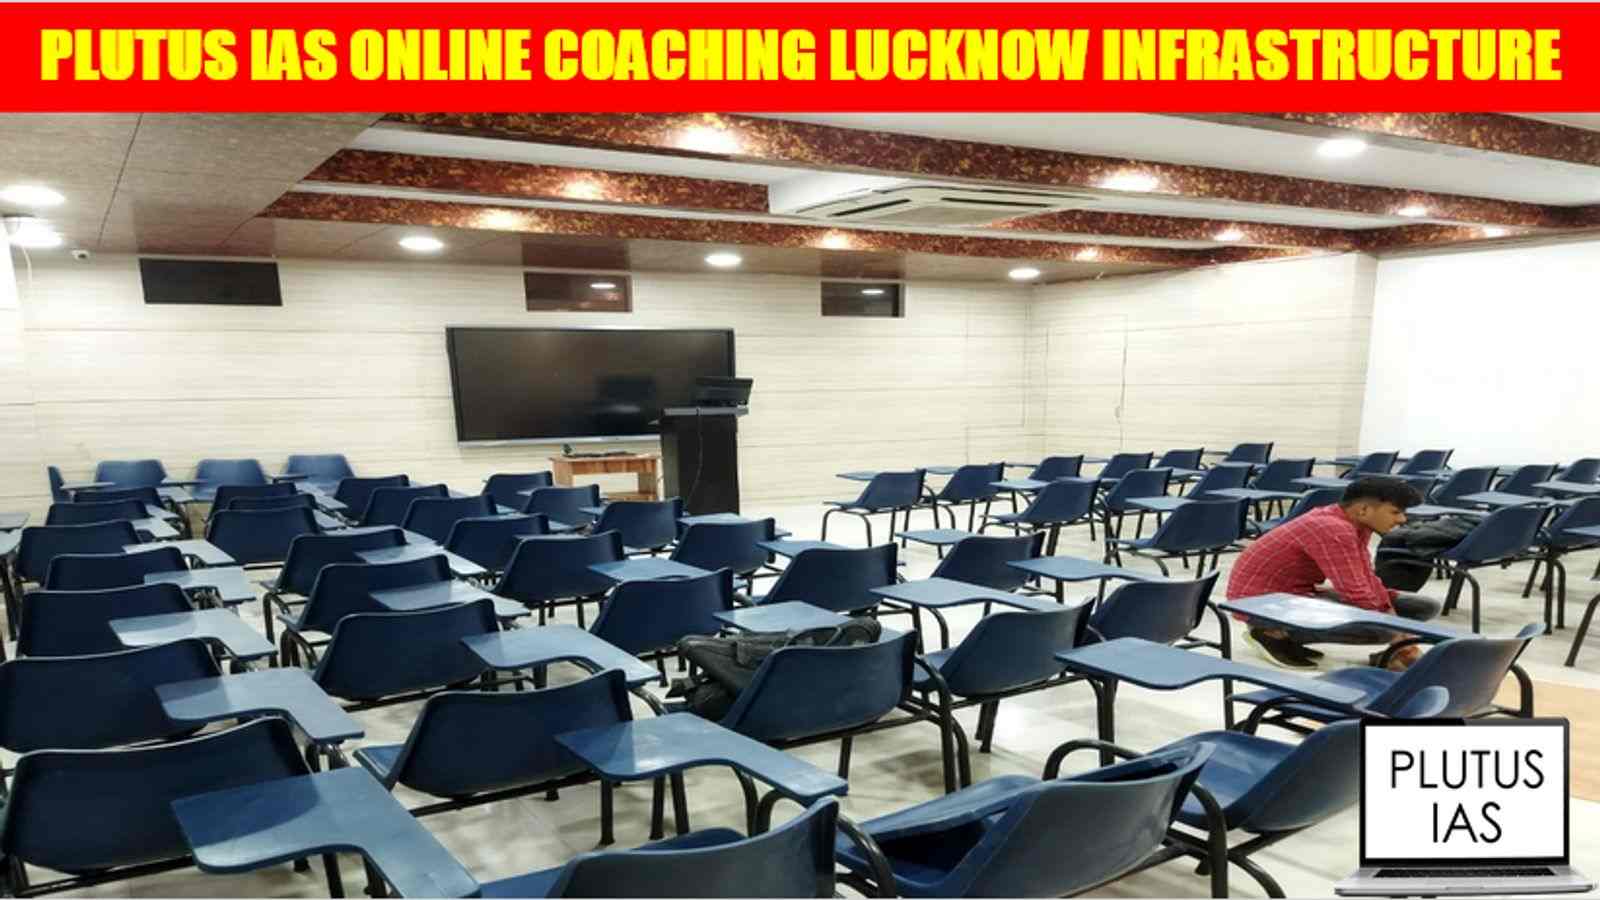 Plutus IAS Online Coaching Lucknow Infrastructure